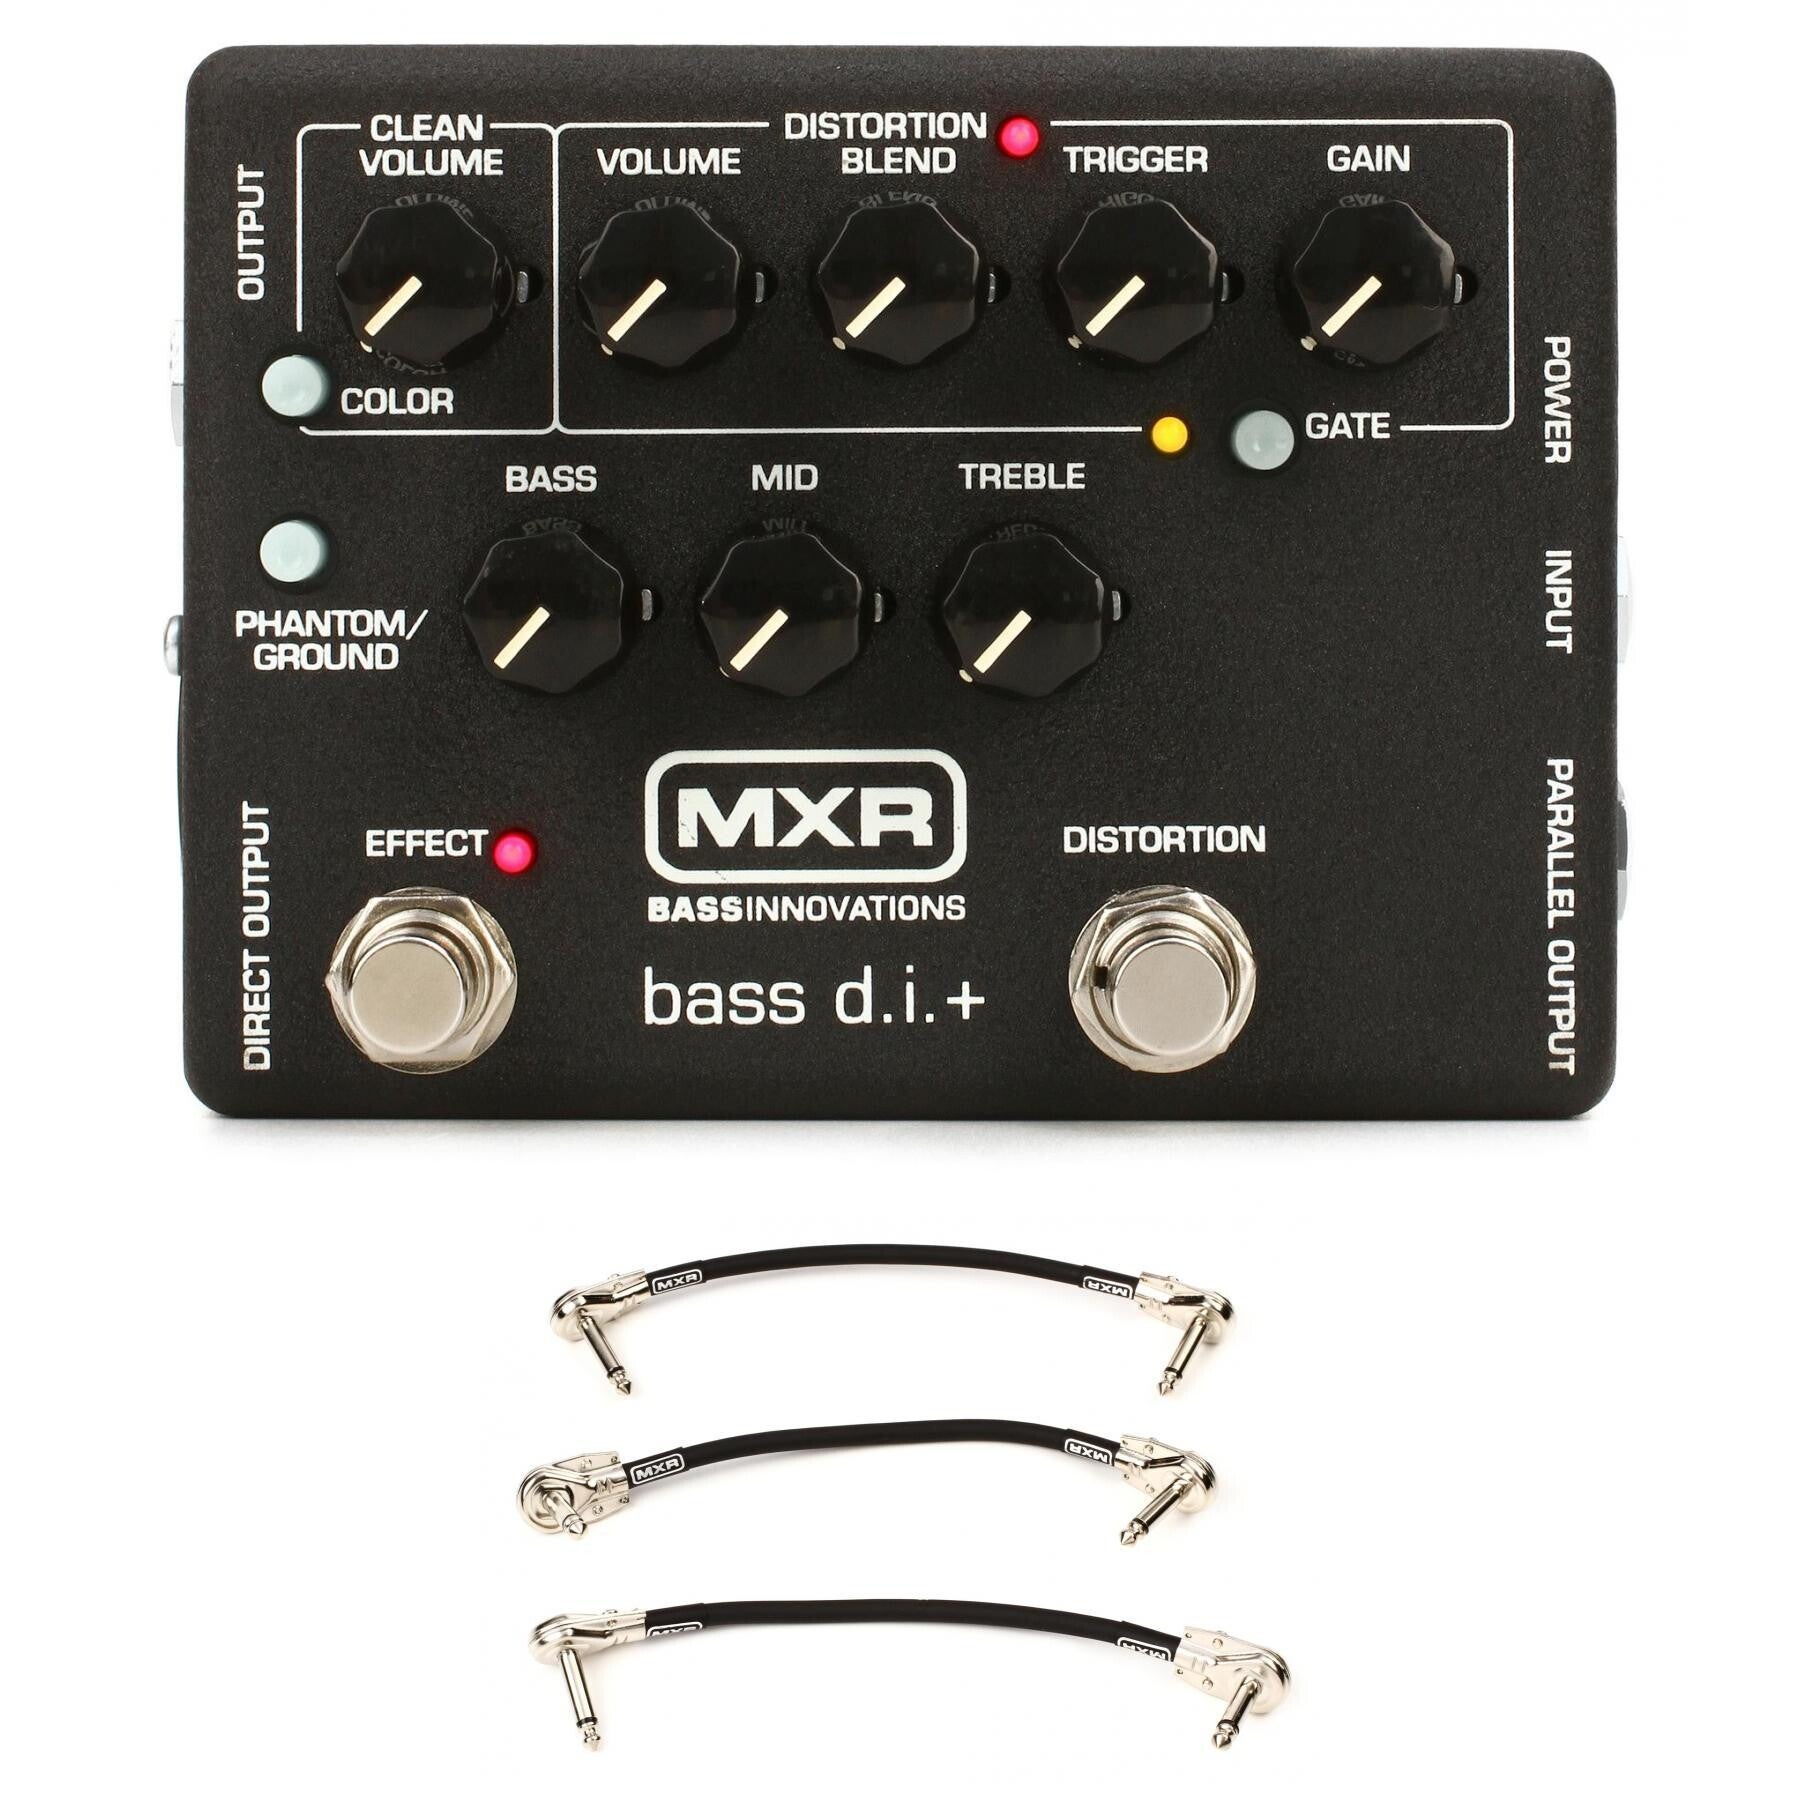 MXR M80 Bass D.I.+ Bass Distortion Pedal with 3 Patch Cables